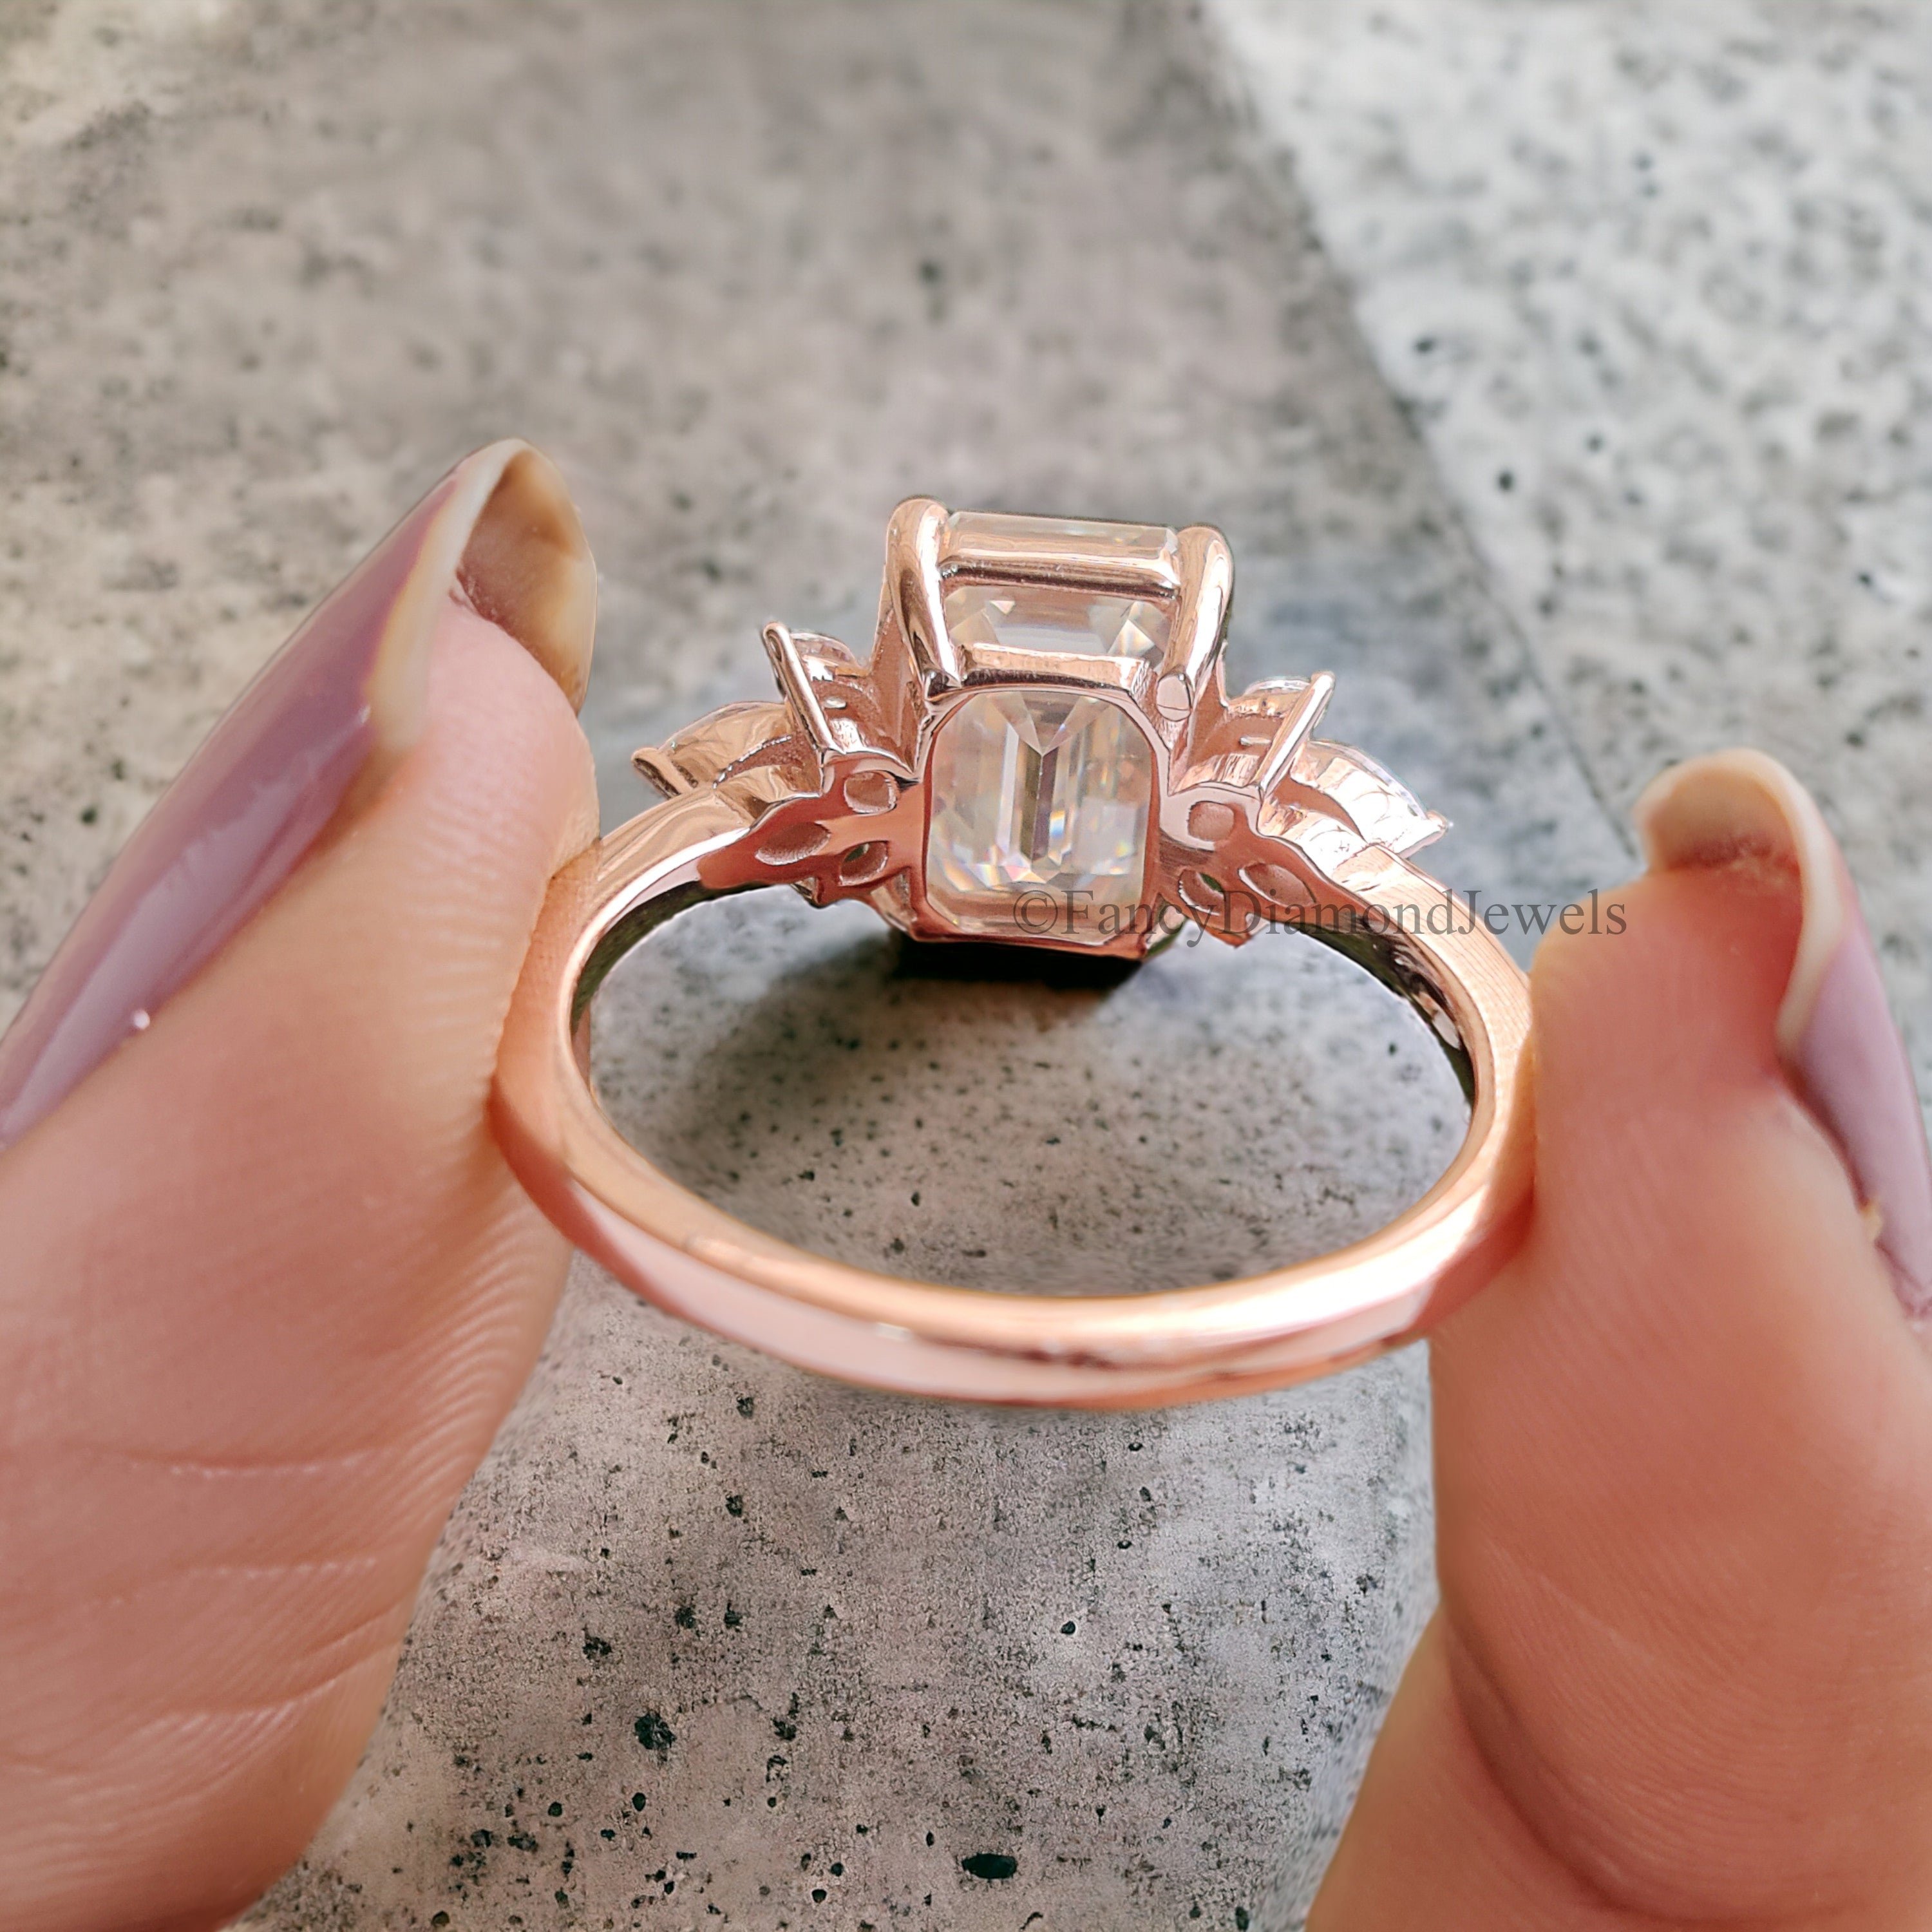 Emerald cut Moissanite engagement ring vintage Unique rose gold Marquise cut diamond Cluster engagement ring women wedding Bridal gift FD176